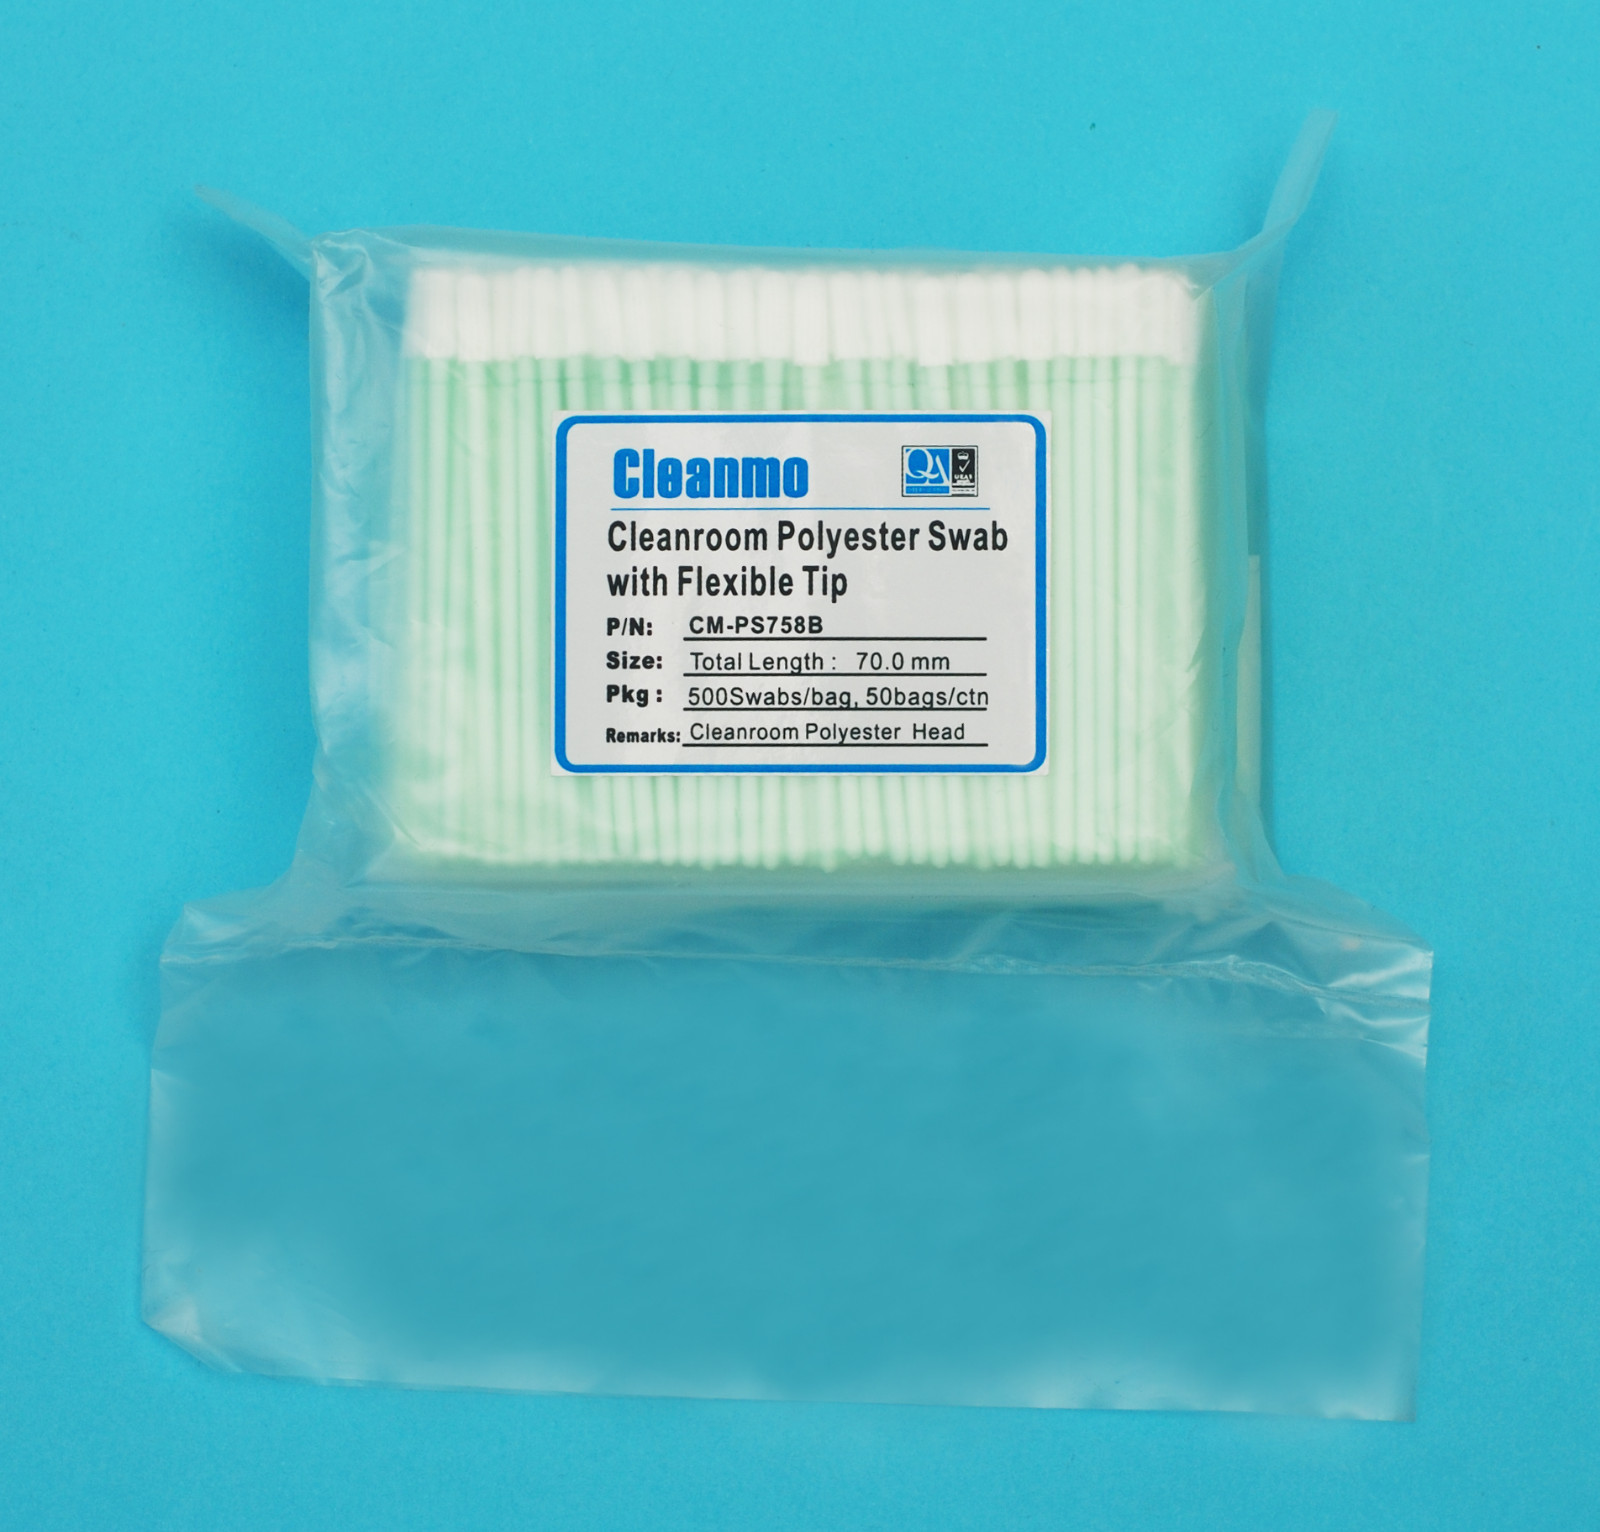 Cleanmo compatible dacron polyester swabs manufacturer for microscopes-7